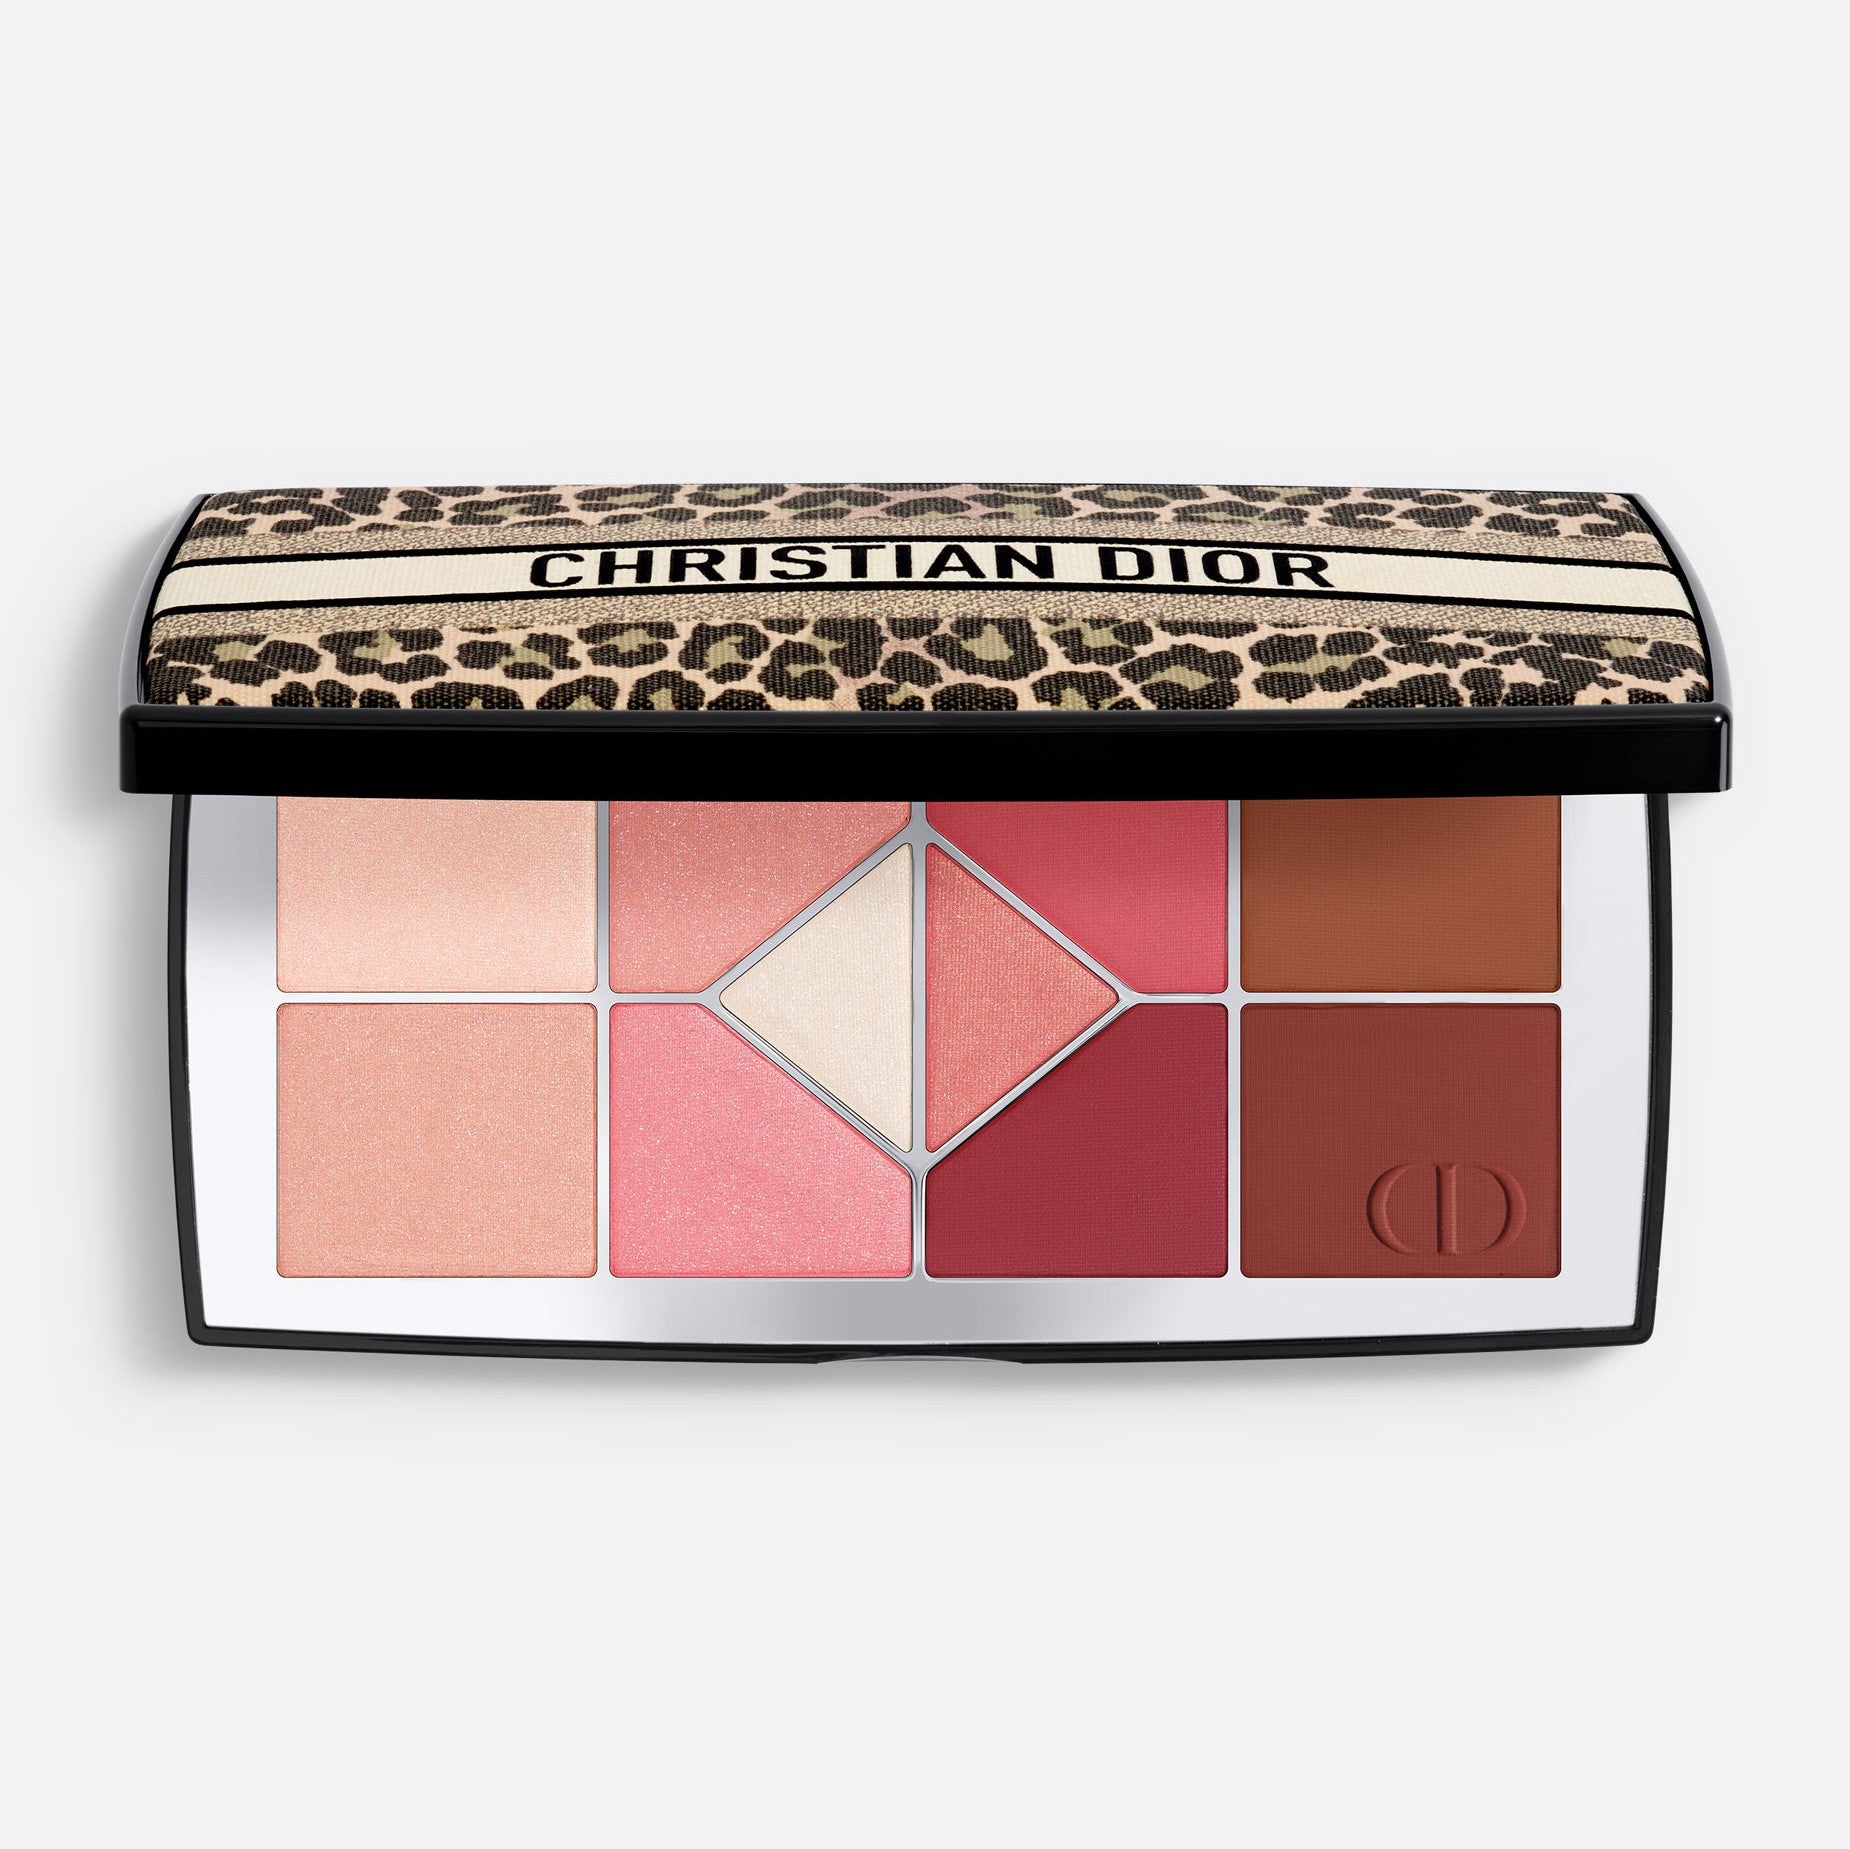 DIORSHOW 10 COULEURS - MITZAH LIMITED EDITION ~ Eye Makeup Palette - 10 eyeshadows - high color and long wear